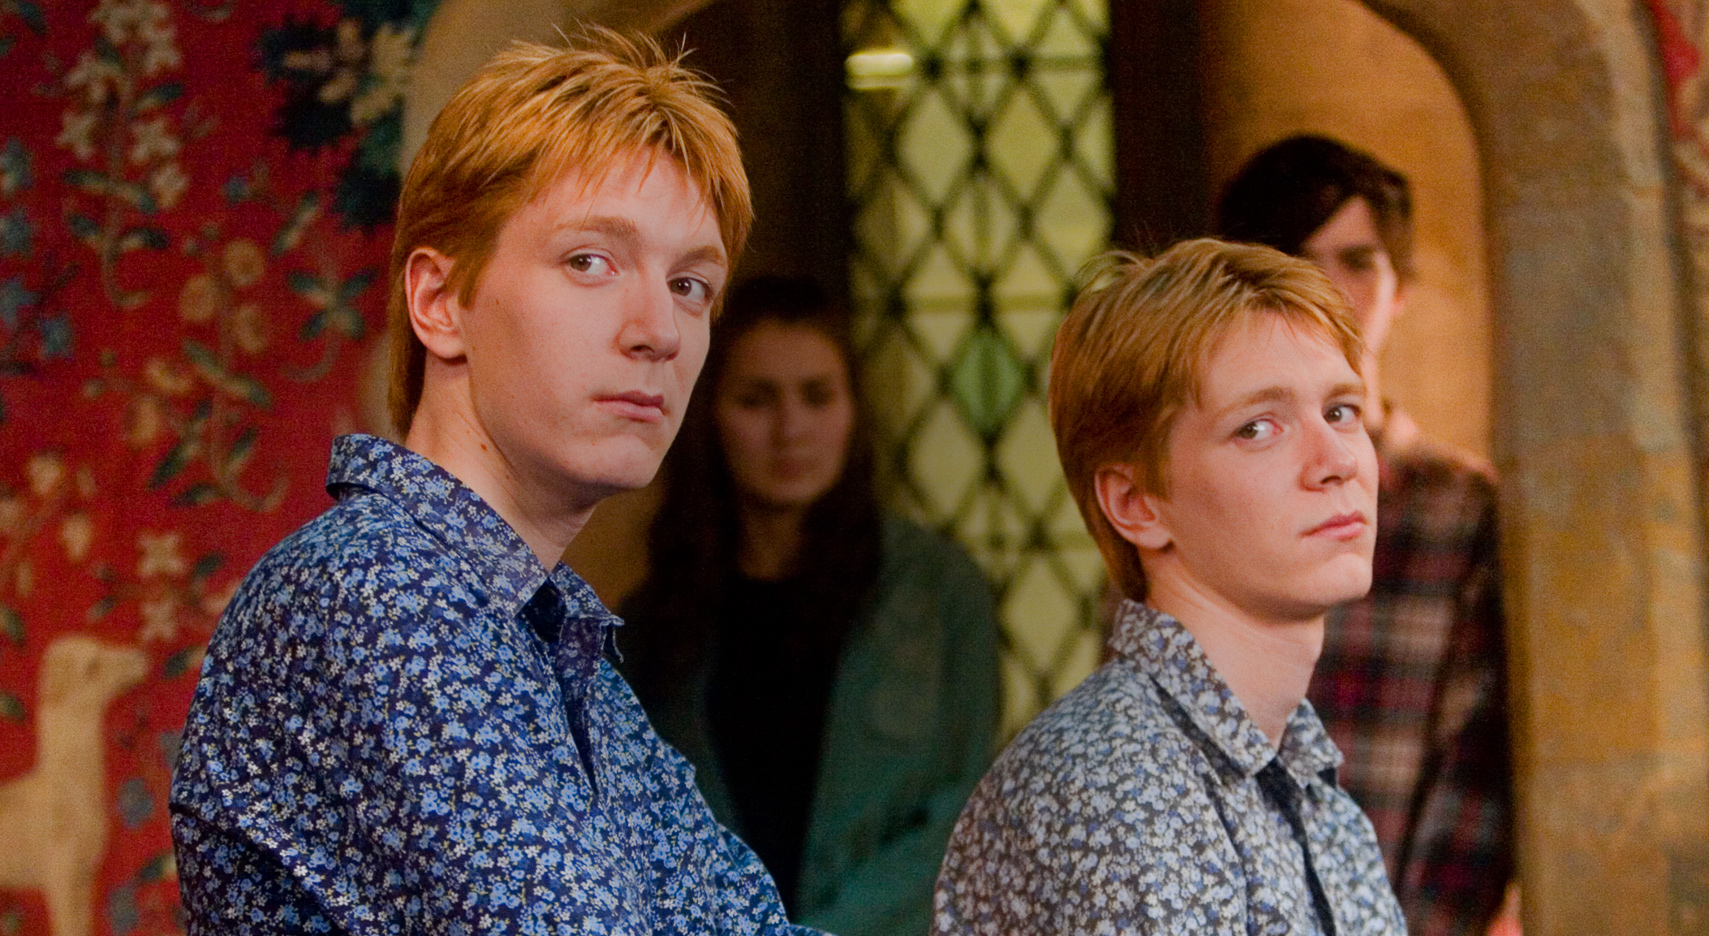 Carousel Fred and George twins feature common room.